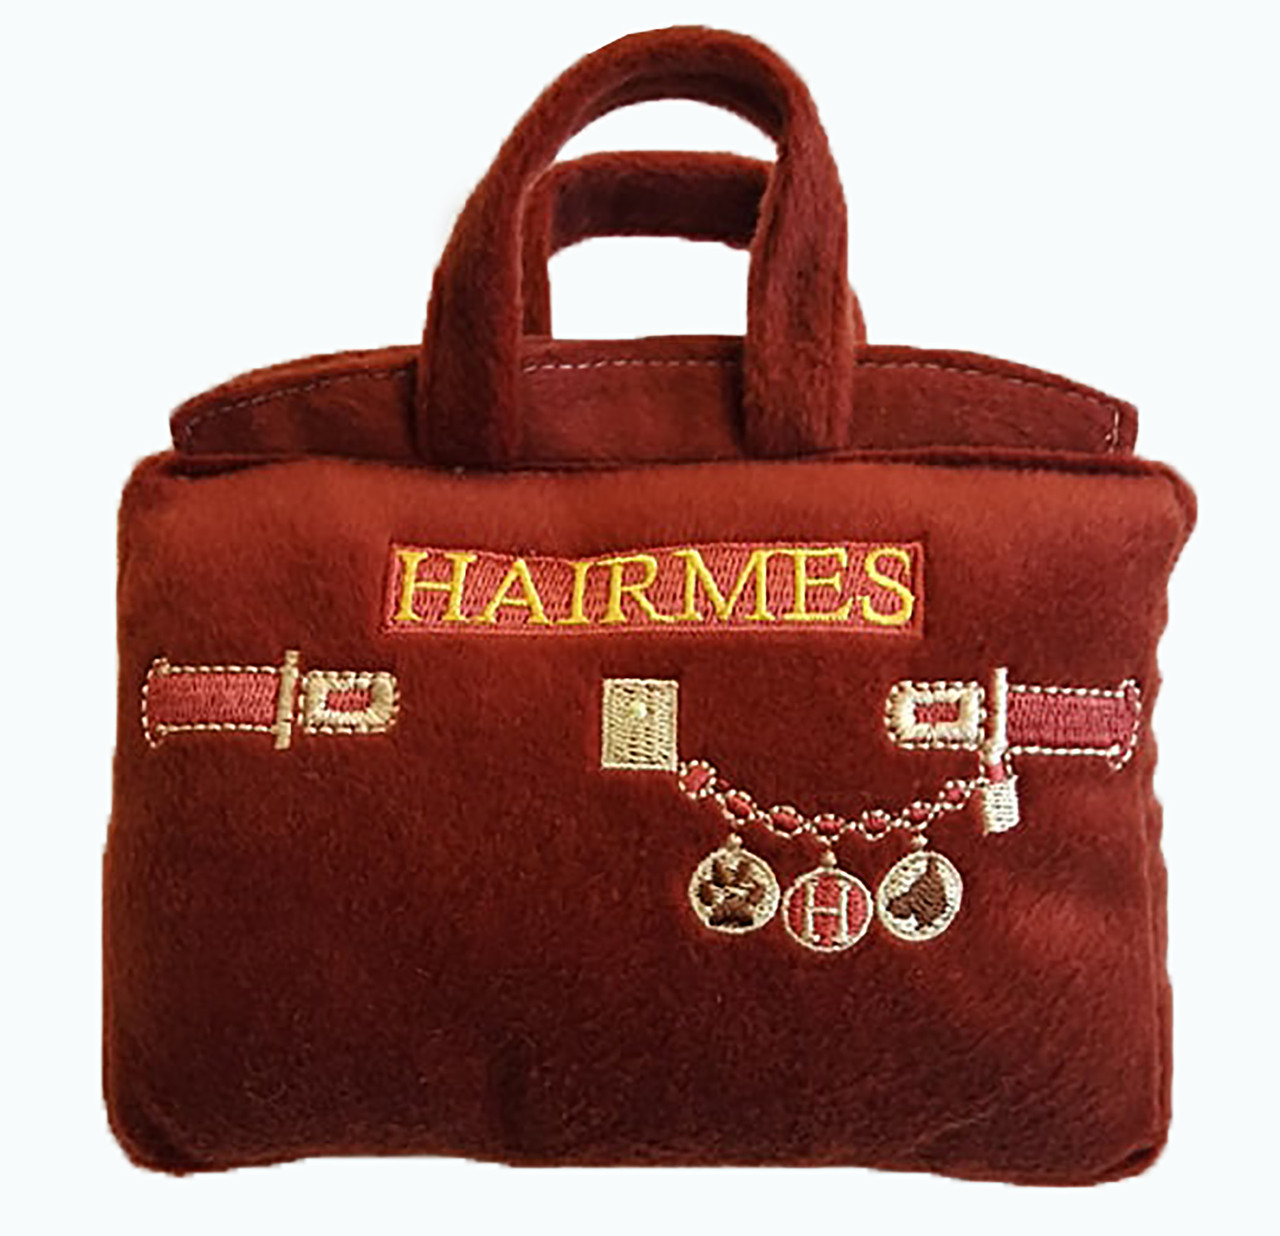 Hairmes Purse Toy